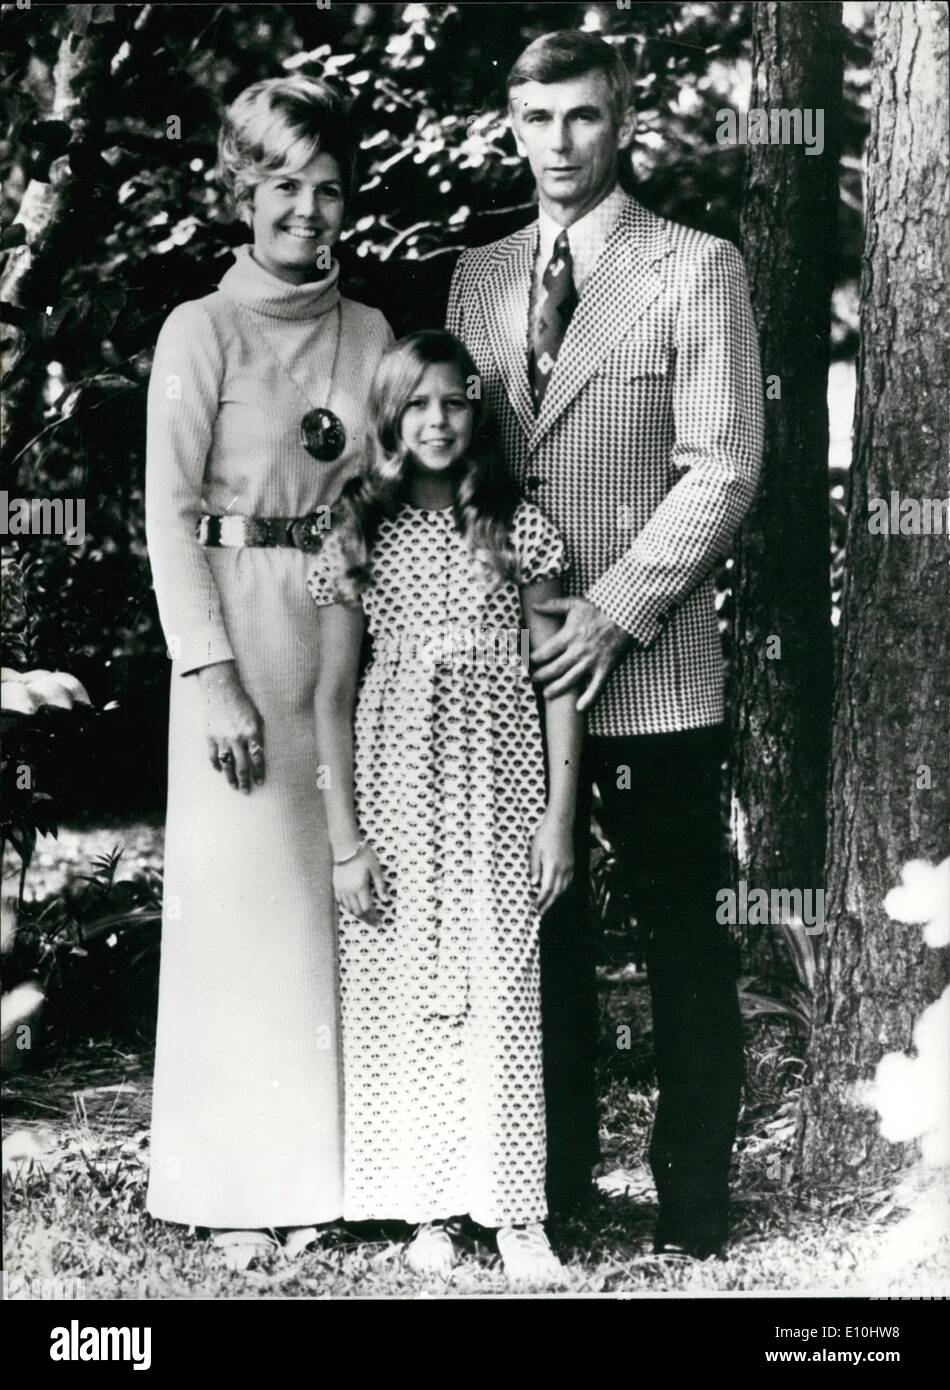 Dec. 12, 1972 - Apollo 17 Mission Commander and Family: Eugene A. Cernan, Mission commander of the Apollo 17 Moon Mission, poses for a family portrait with his wife, Barbara and their daughter Teresa Dawn, 9 at their home in Nassau Bay, near the Manned Spacecraft Centre, Houston, Texas. Apollo 17 is the final Lunar Landing Mission of the Apollo Programme. Stock Photo